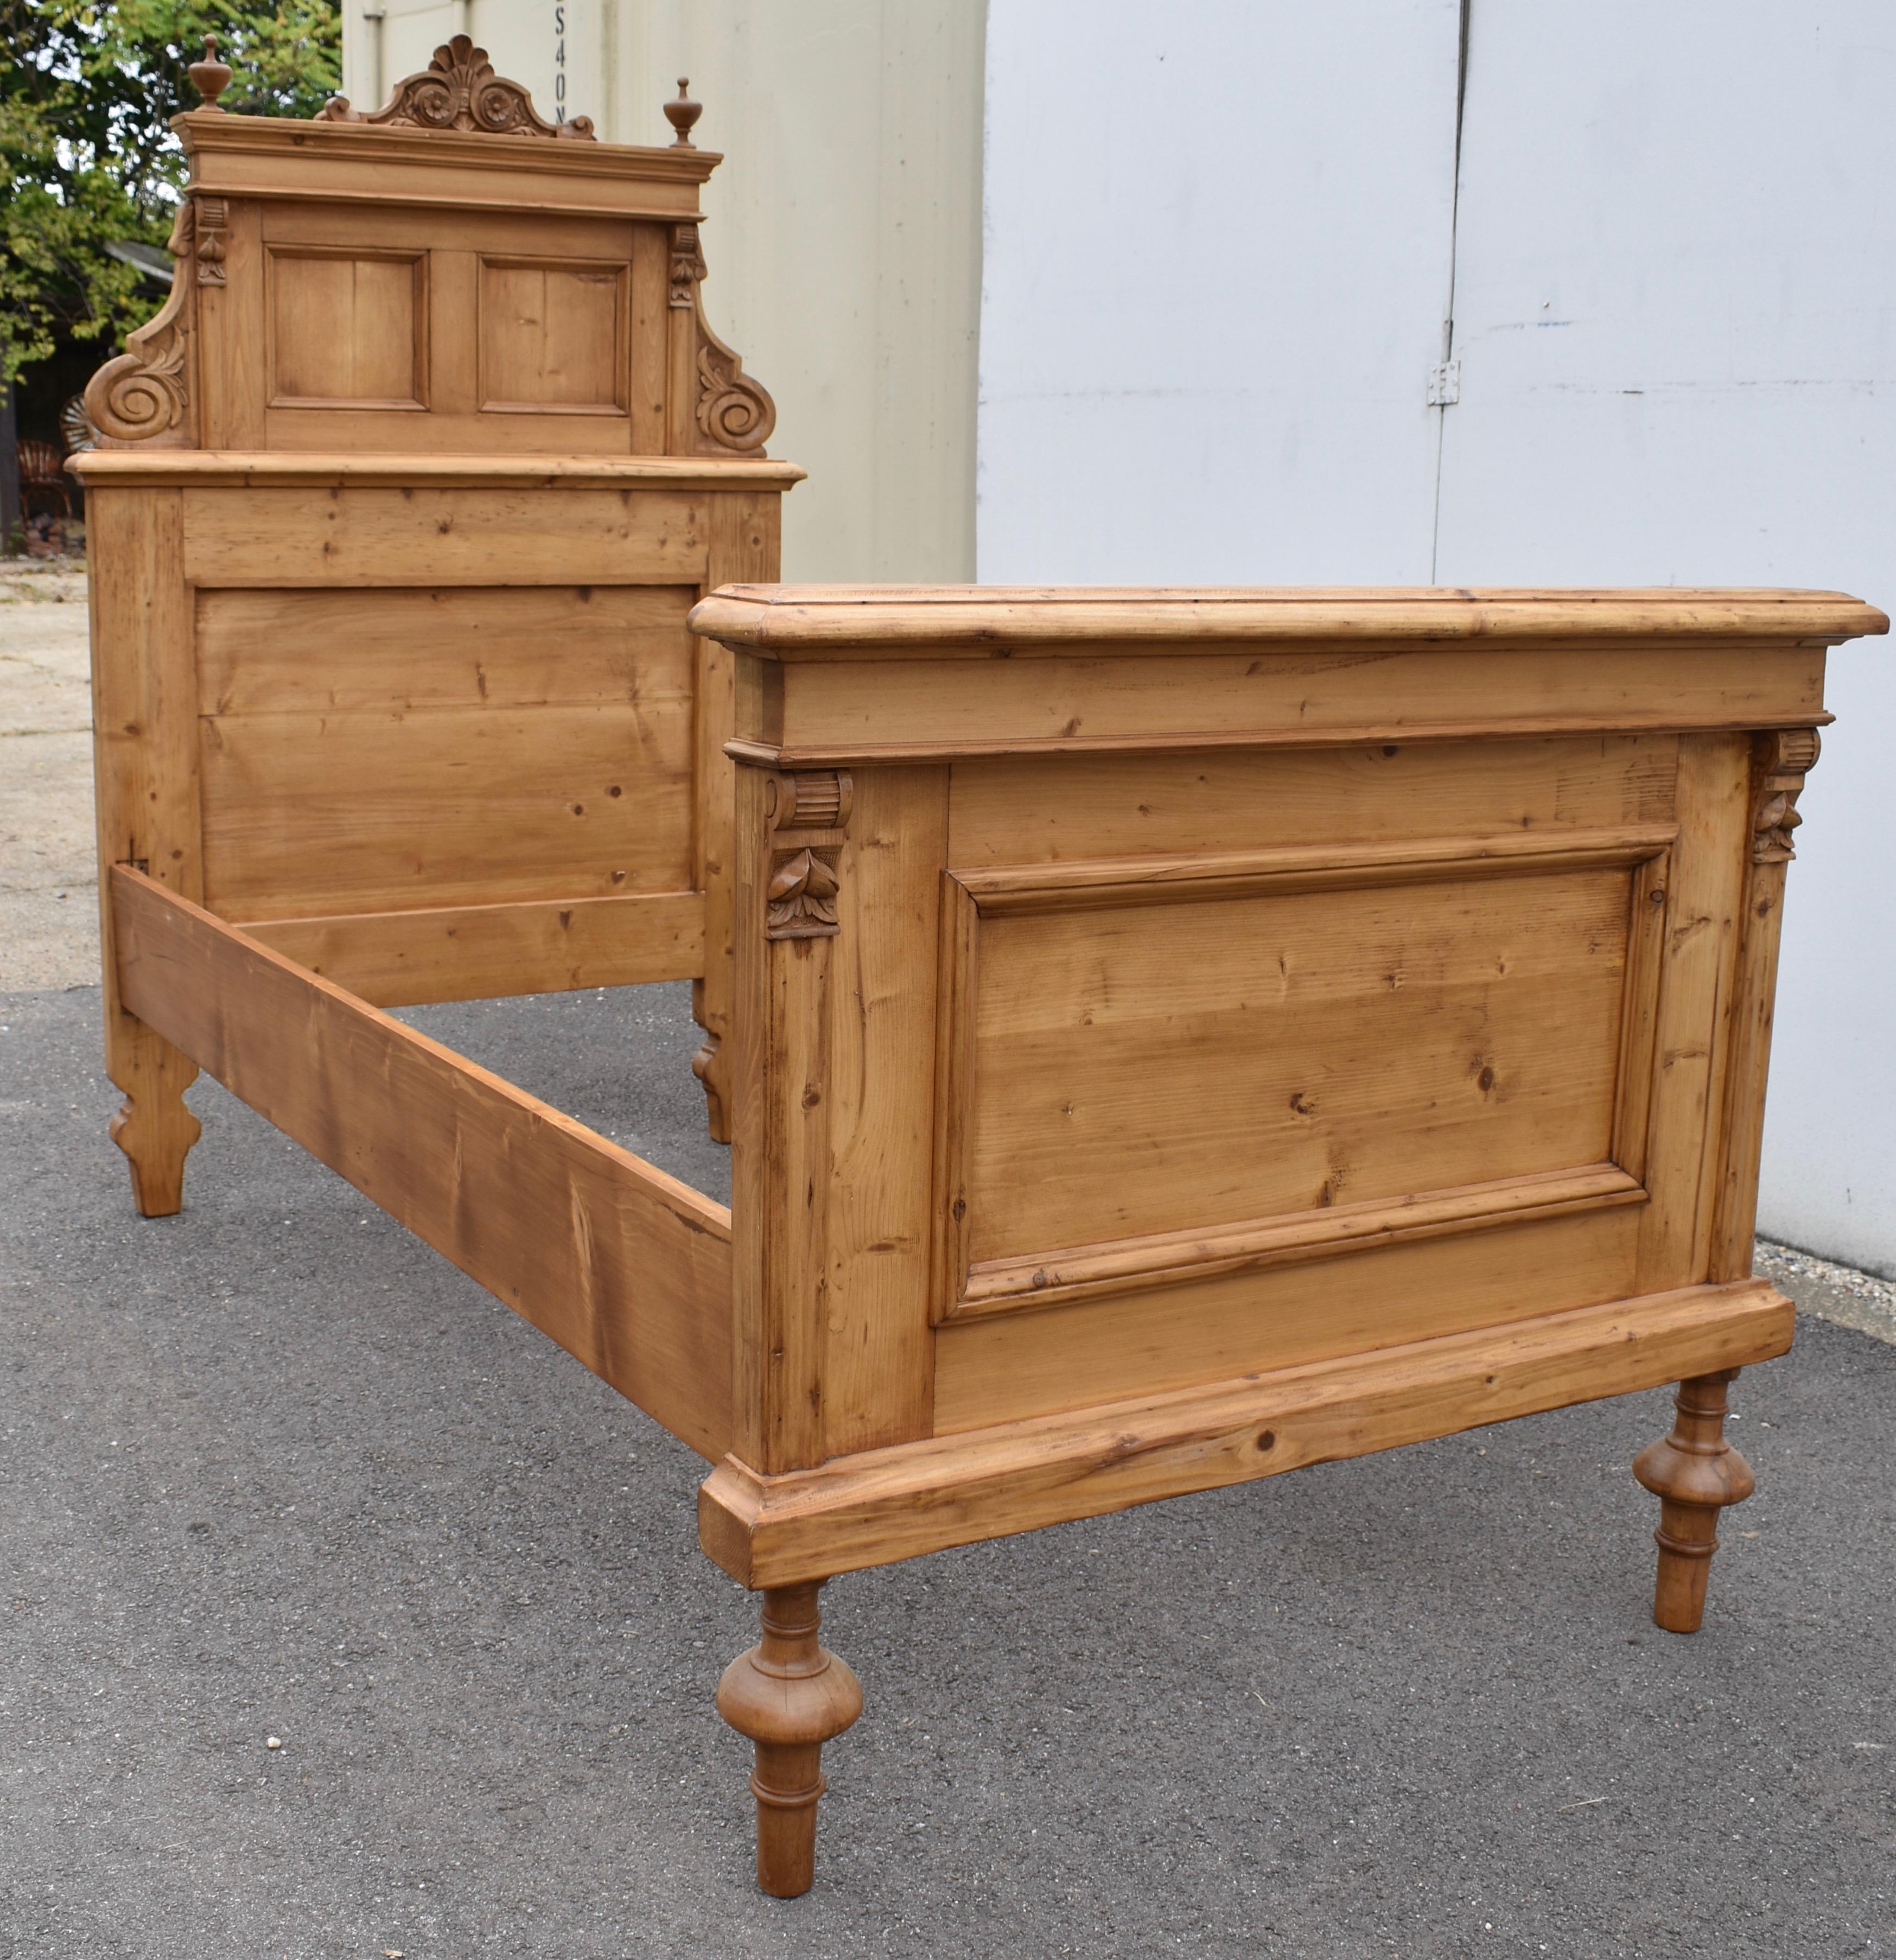 This majestic Art Nouveau box bed would be a stately presence in any child’s bedroom.  The headboard is built in two pieces.  The lower part consists of a flat panel, framed with thick rails and stiles.  The upper part has a bold crown molding